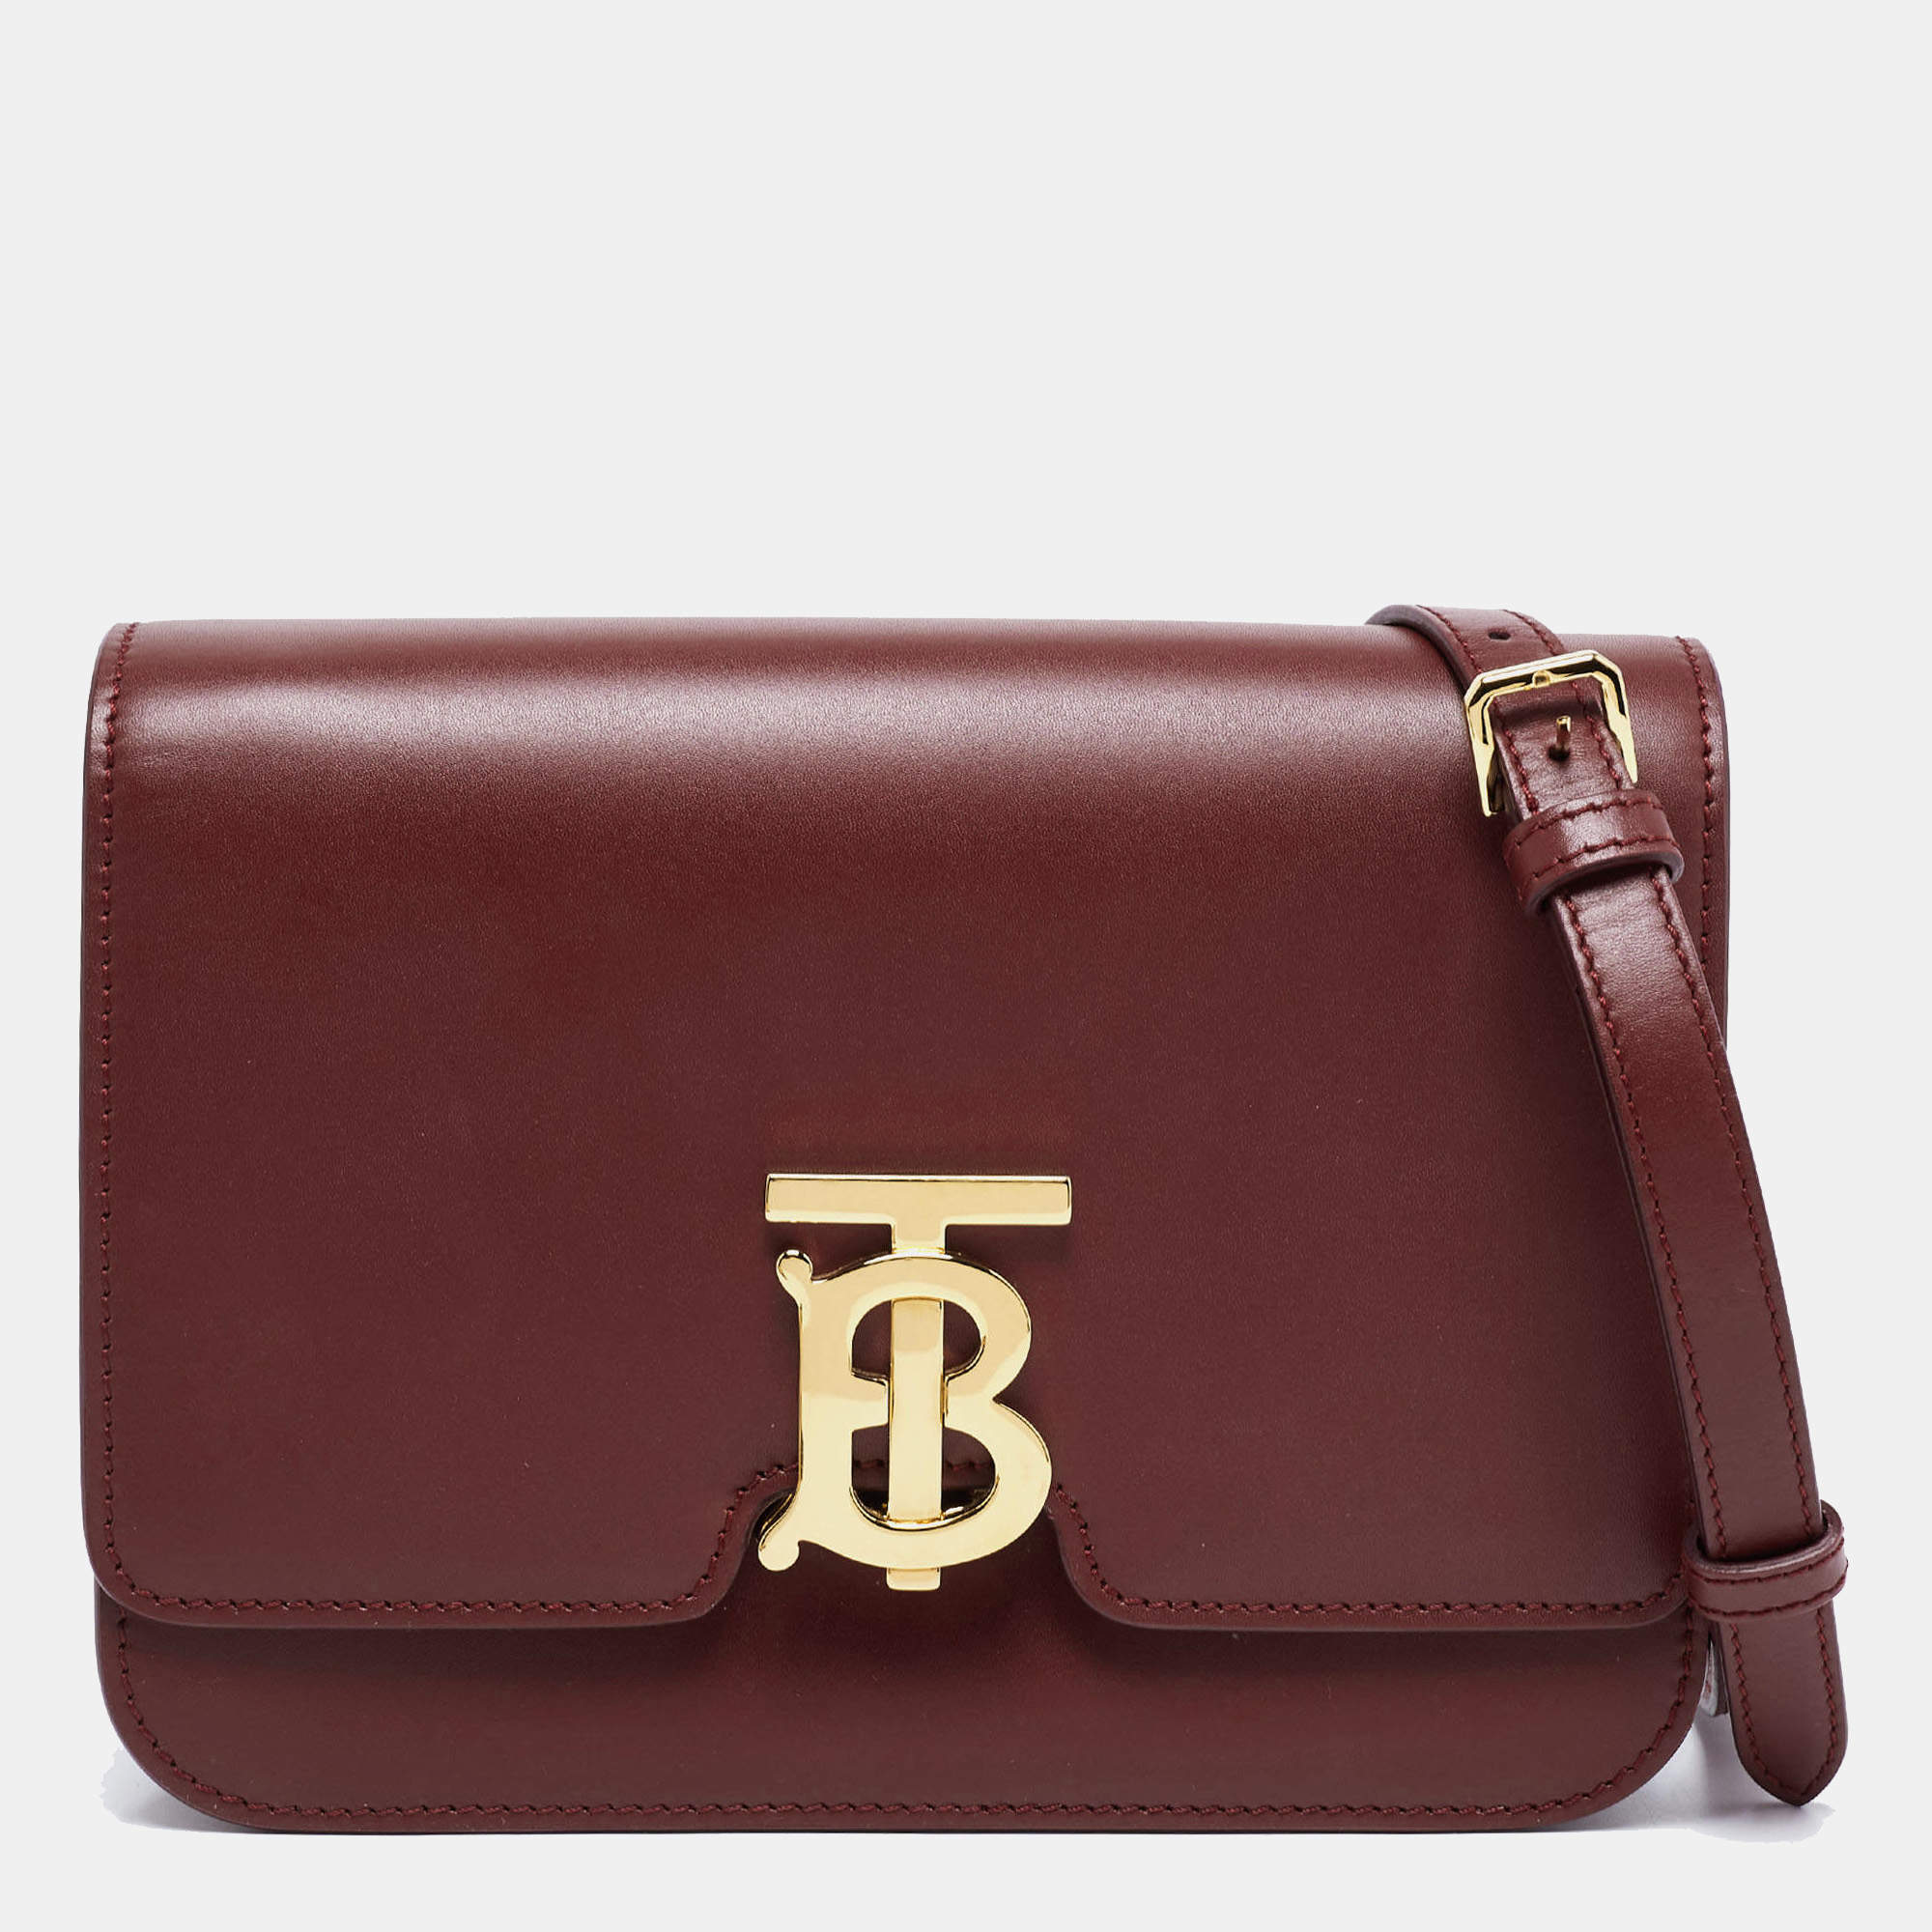 Buy Burberry Shoulder bags & pouches online - Women - 48 products |  FASHIOLA.in